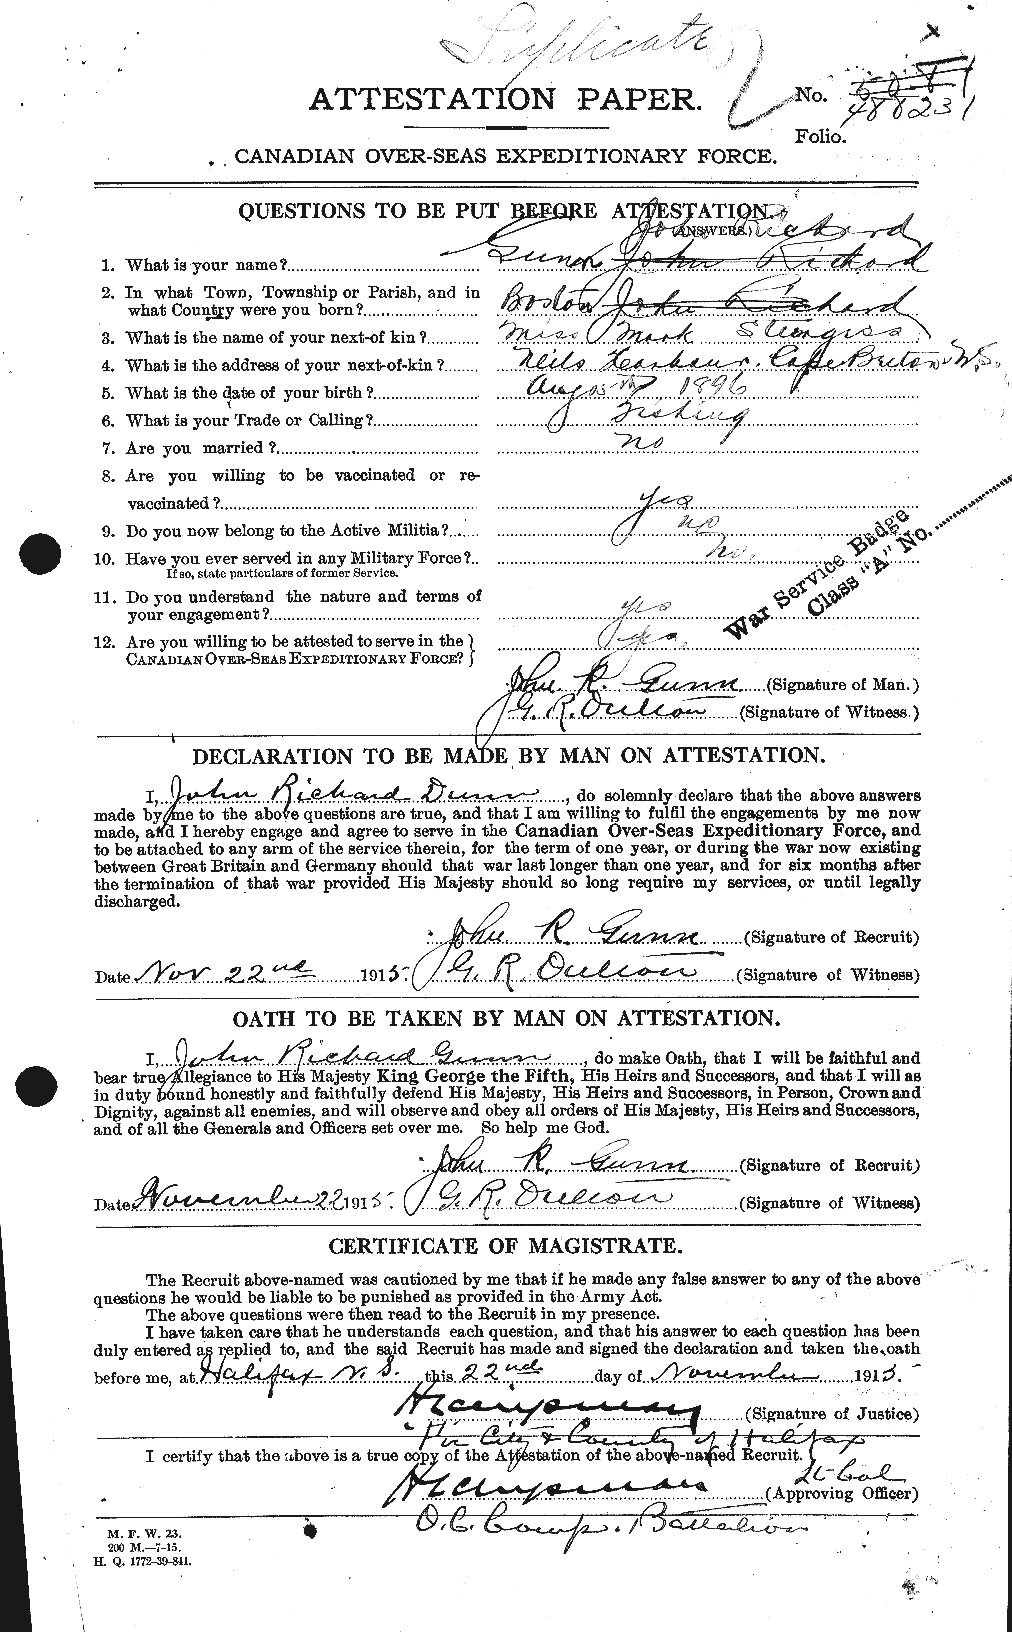 Personnel Records of the First World War - CEF 369300a